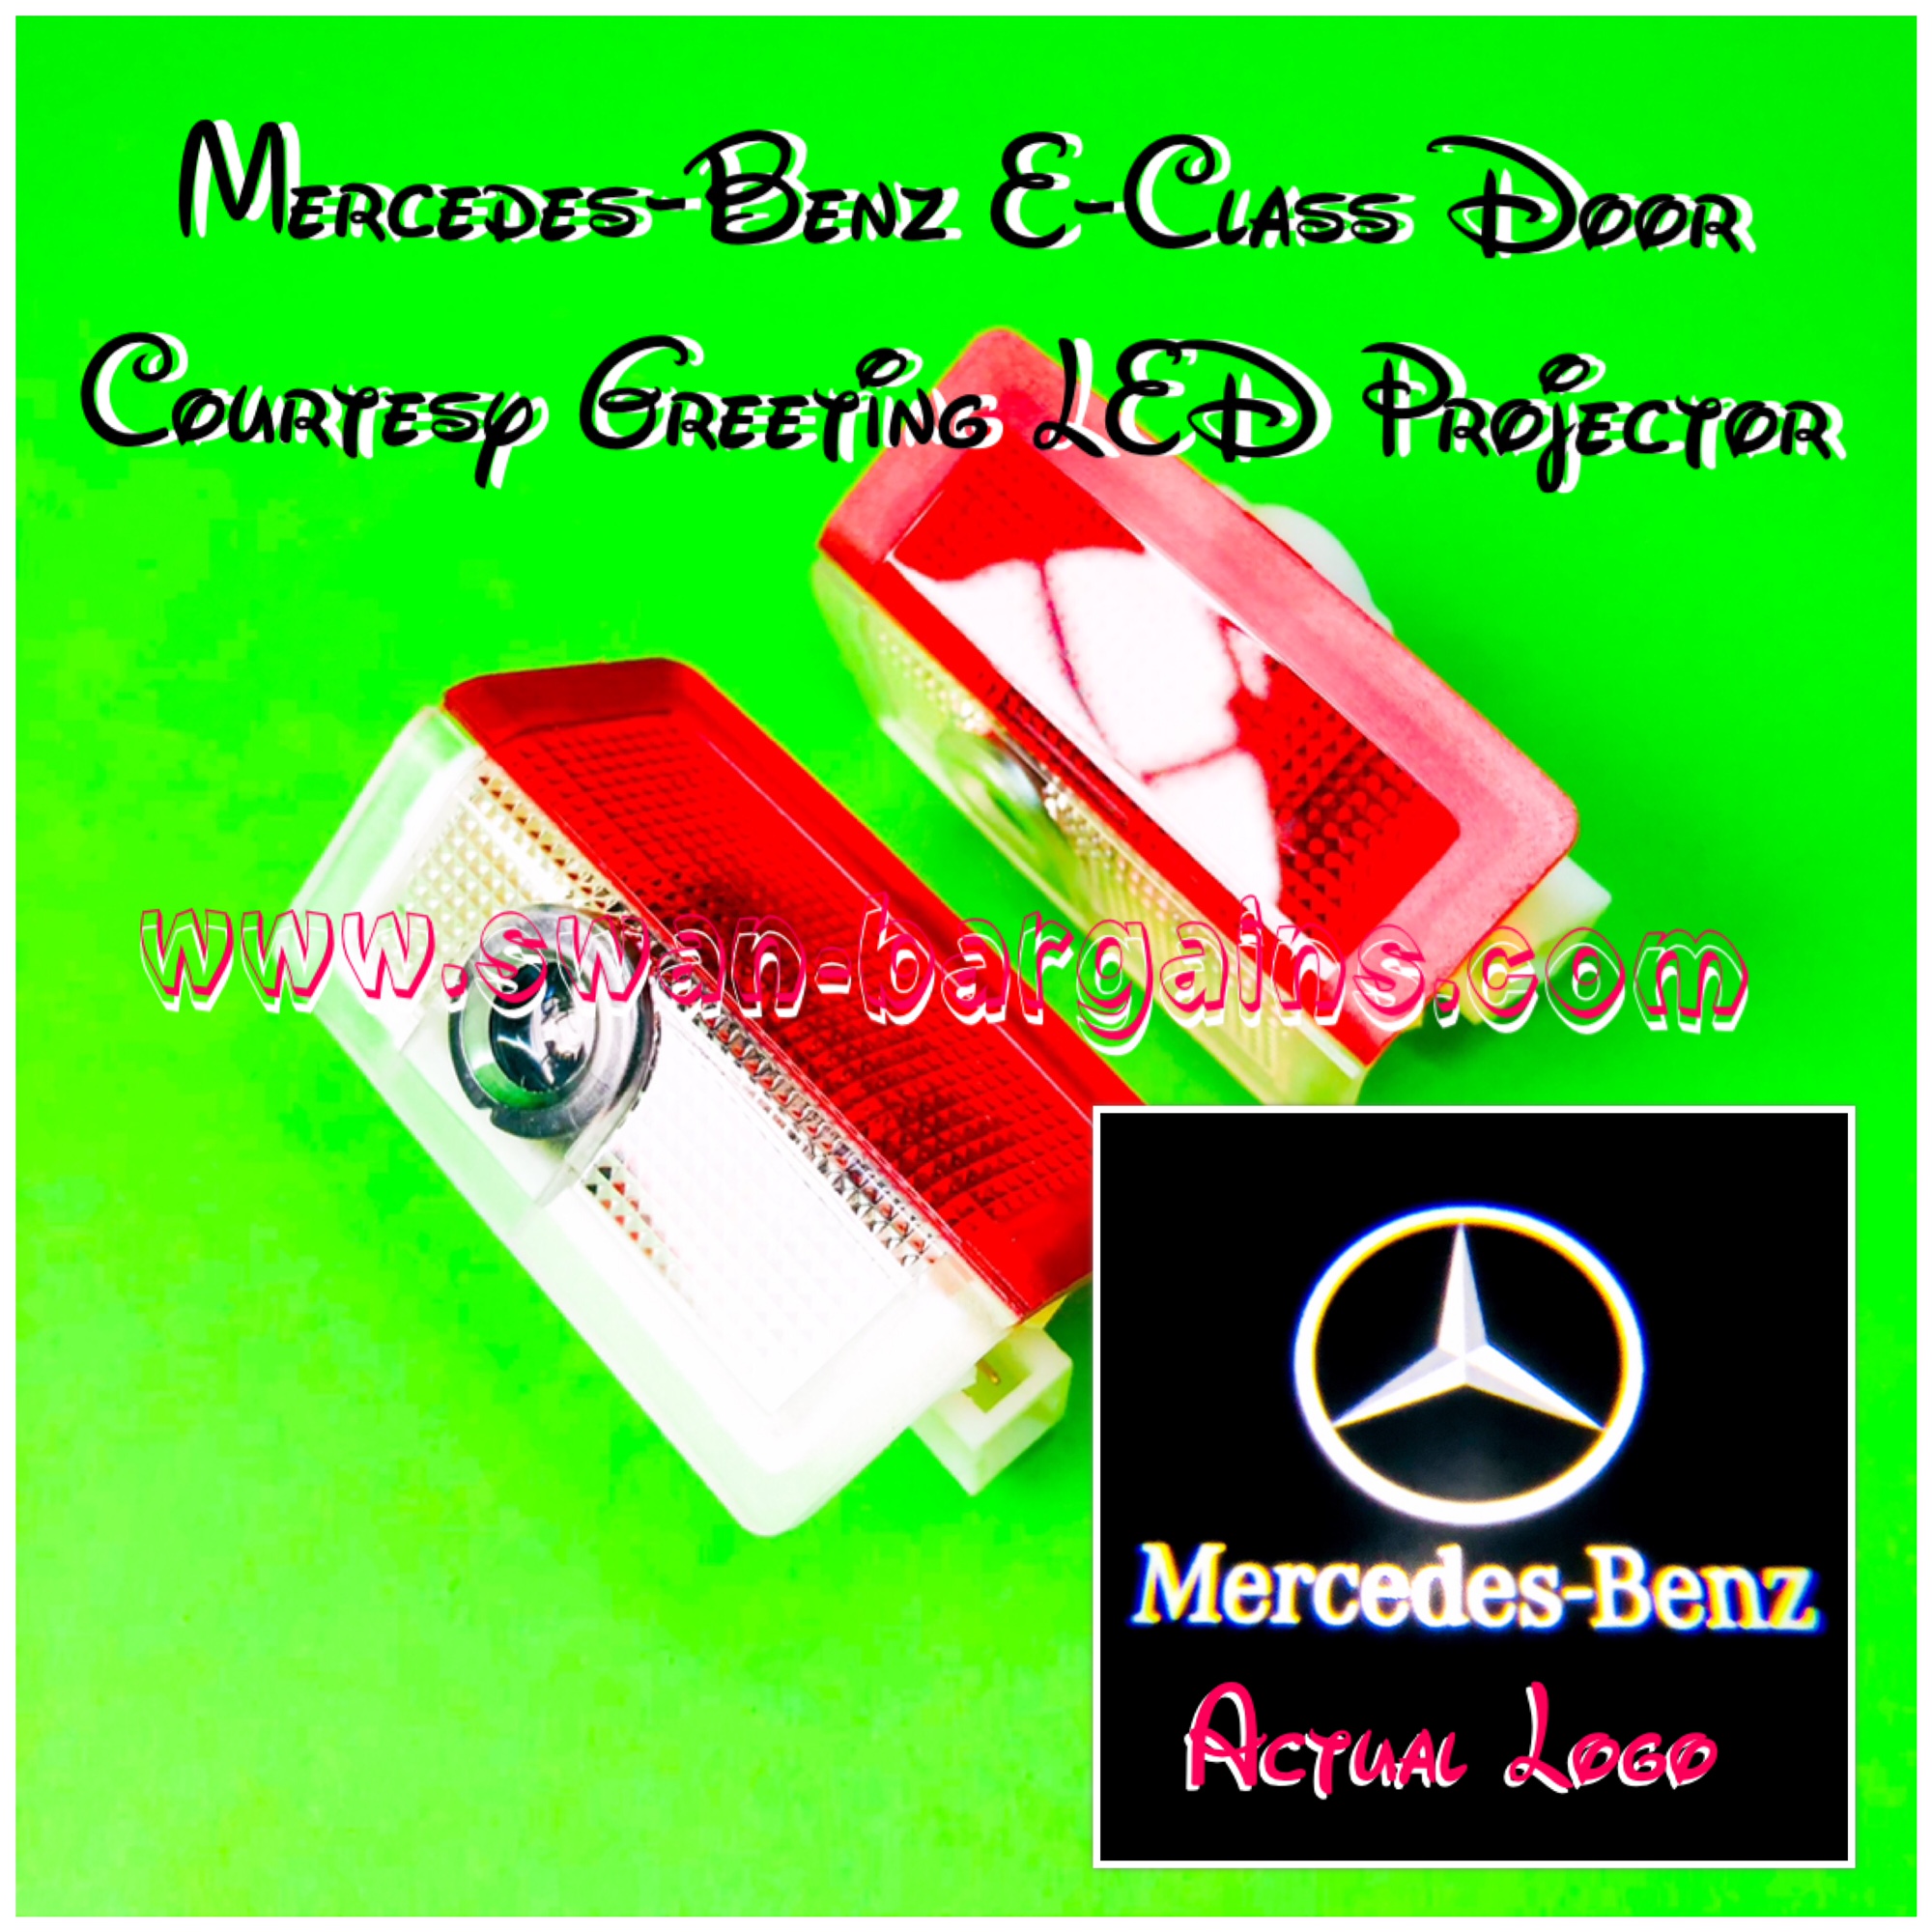 Mercedes Benz E-Class Integrated Door Courtesy LED Projector Lamp Singapore - Silver Benz